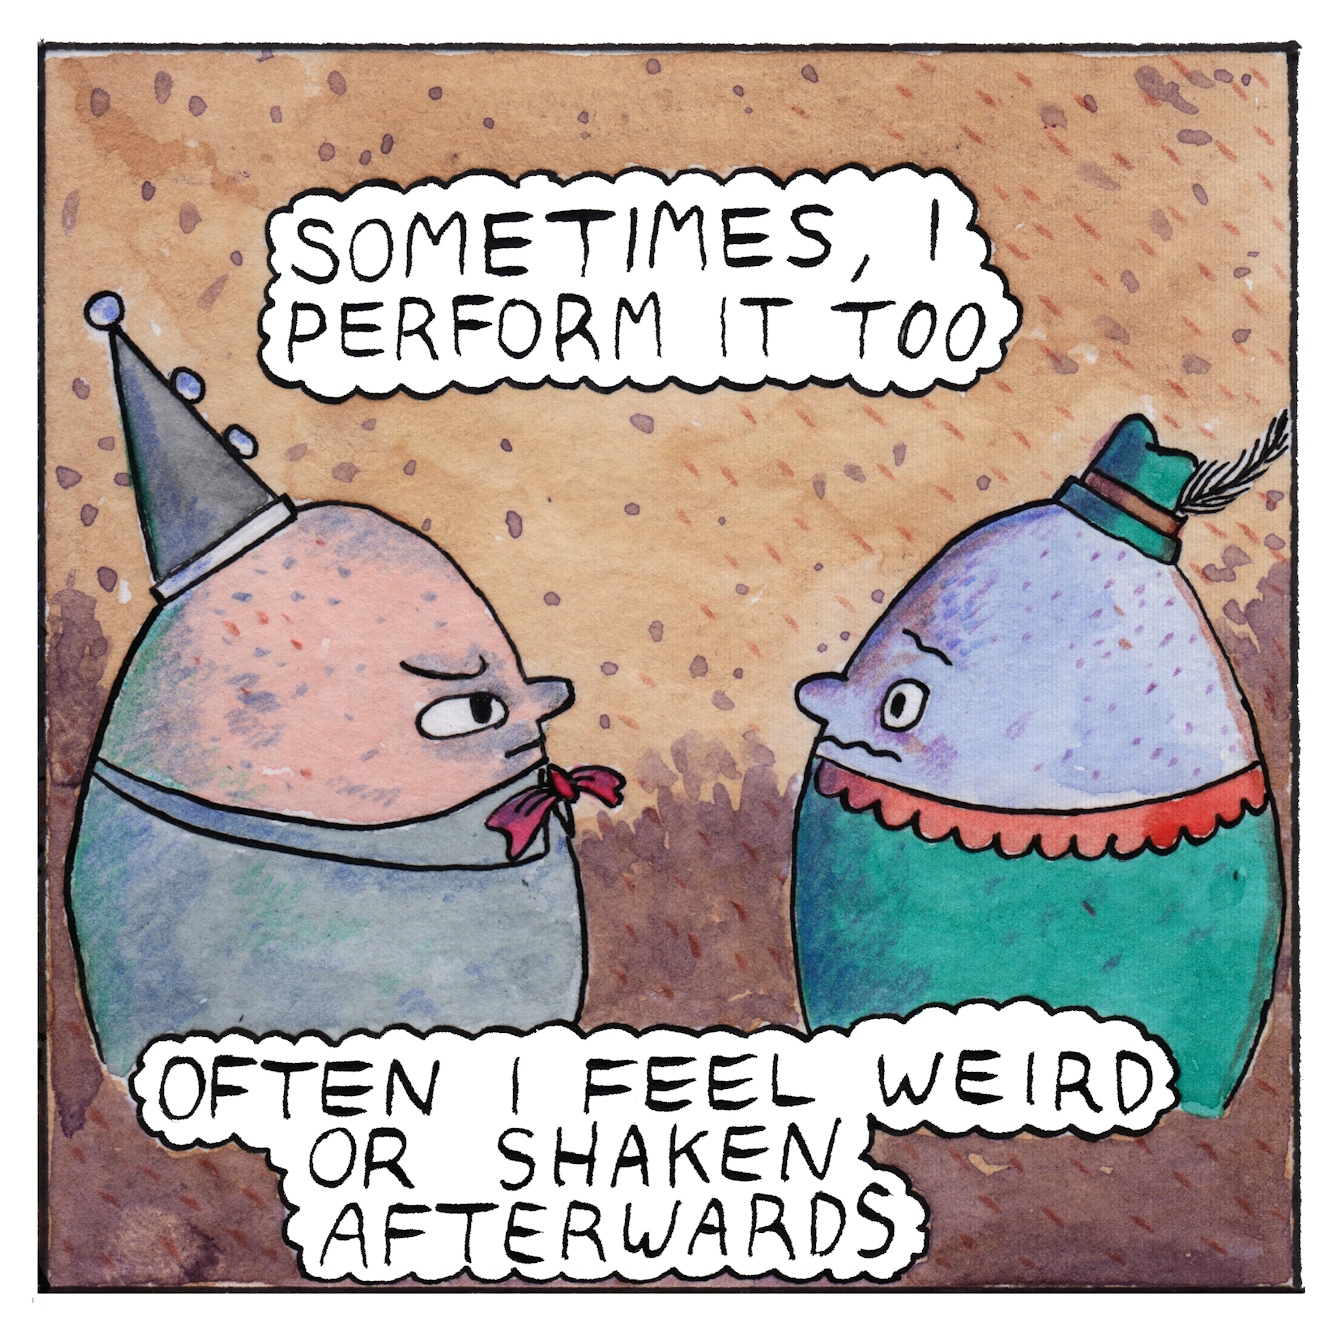 Panel 2 of the comic 'Egg Inc.': Two egg-shaped characters wearing diferent shaped hats and costumes stand face-to-face against a brown earth background. A text bubble above them says "Sometimes, I perform it too". A text bubble below them says "Often I feel weird or shaken afterwards".